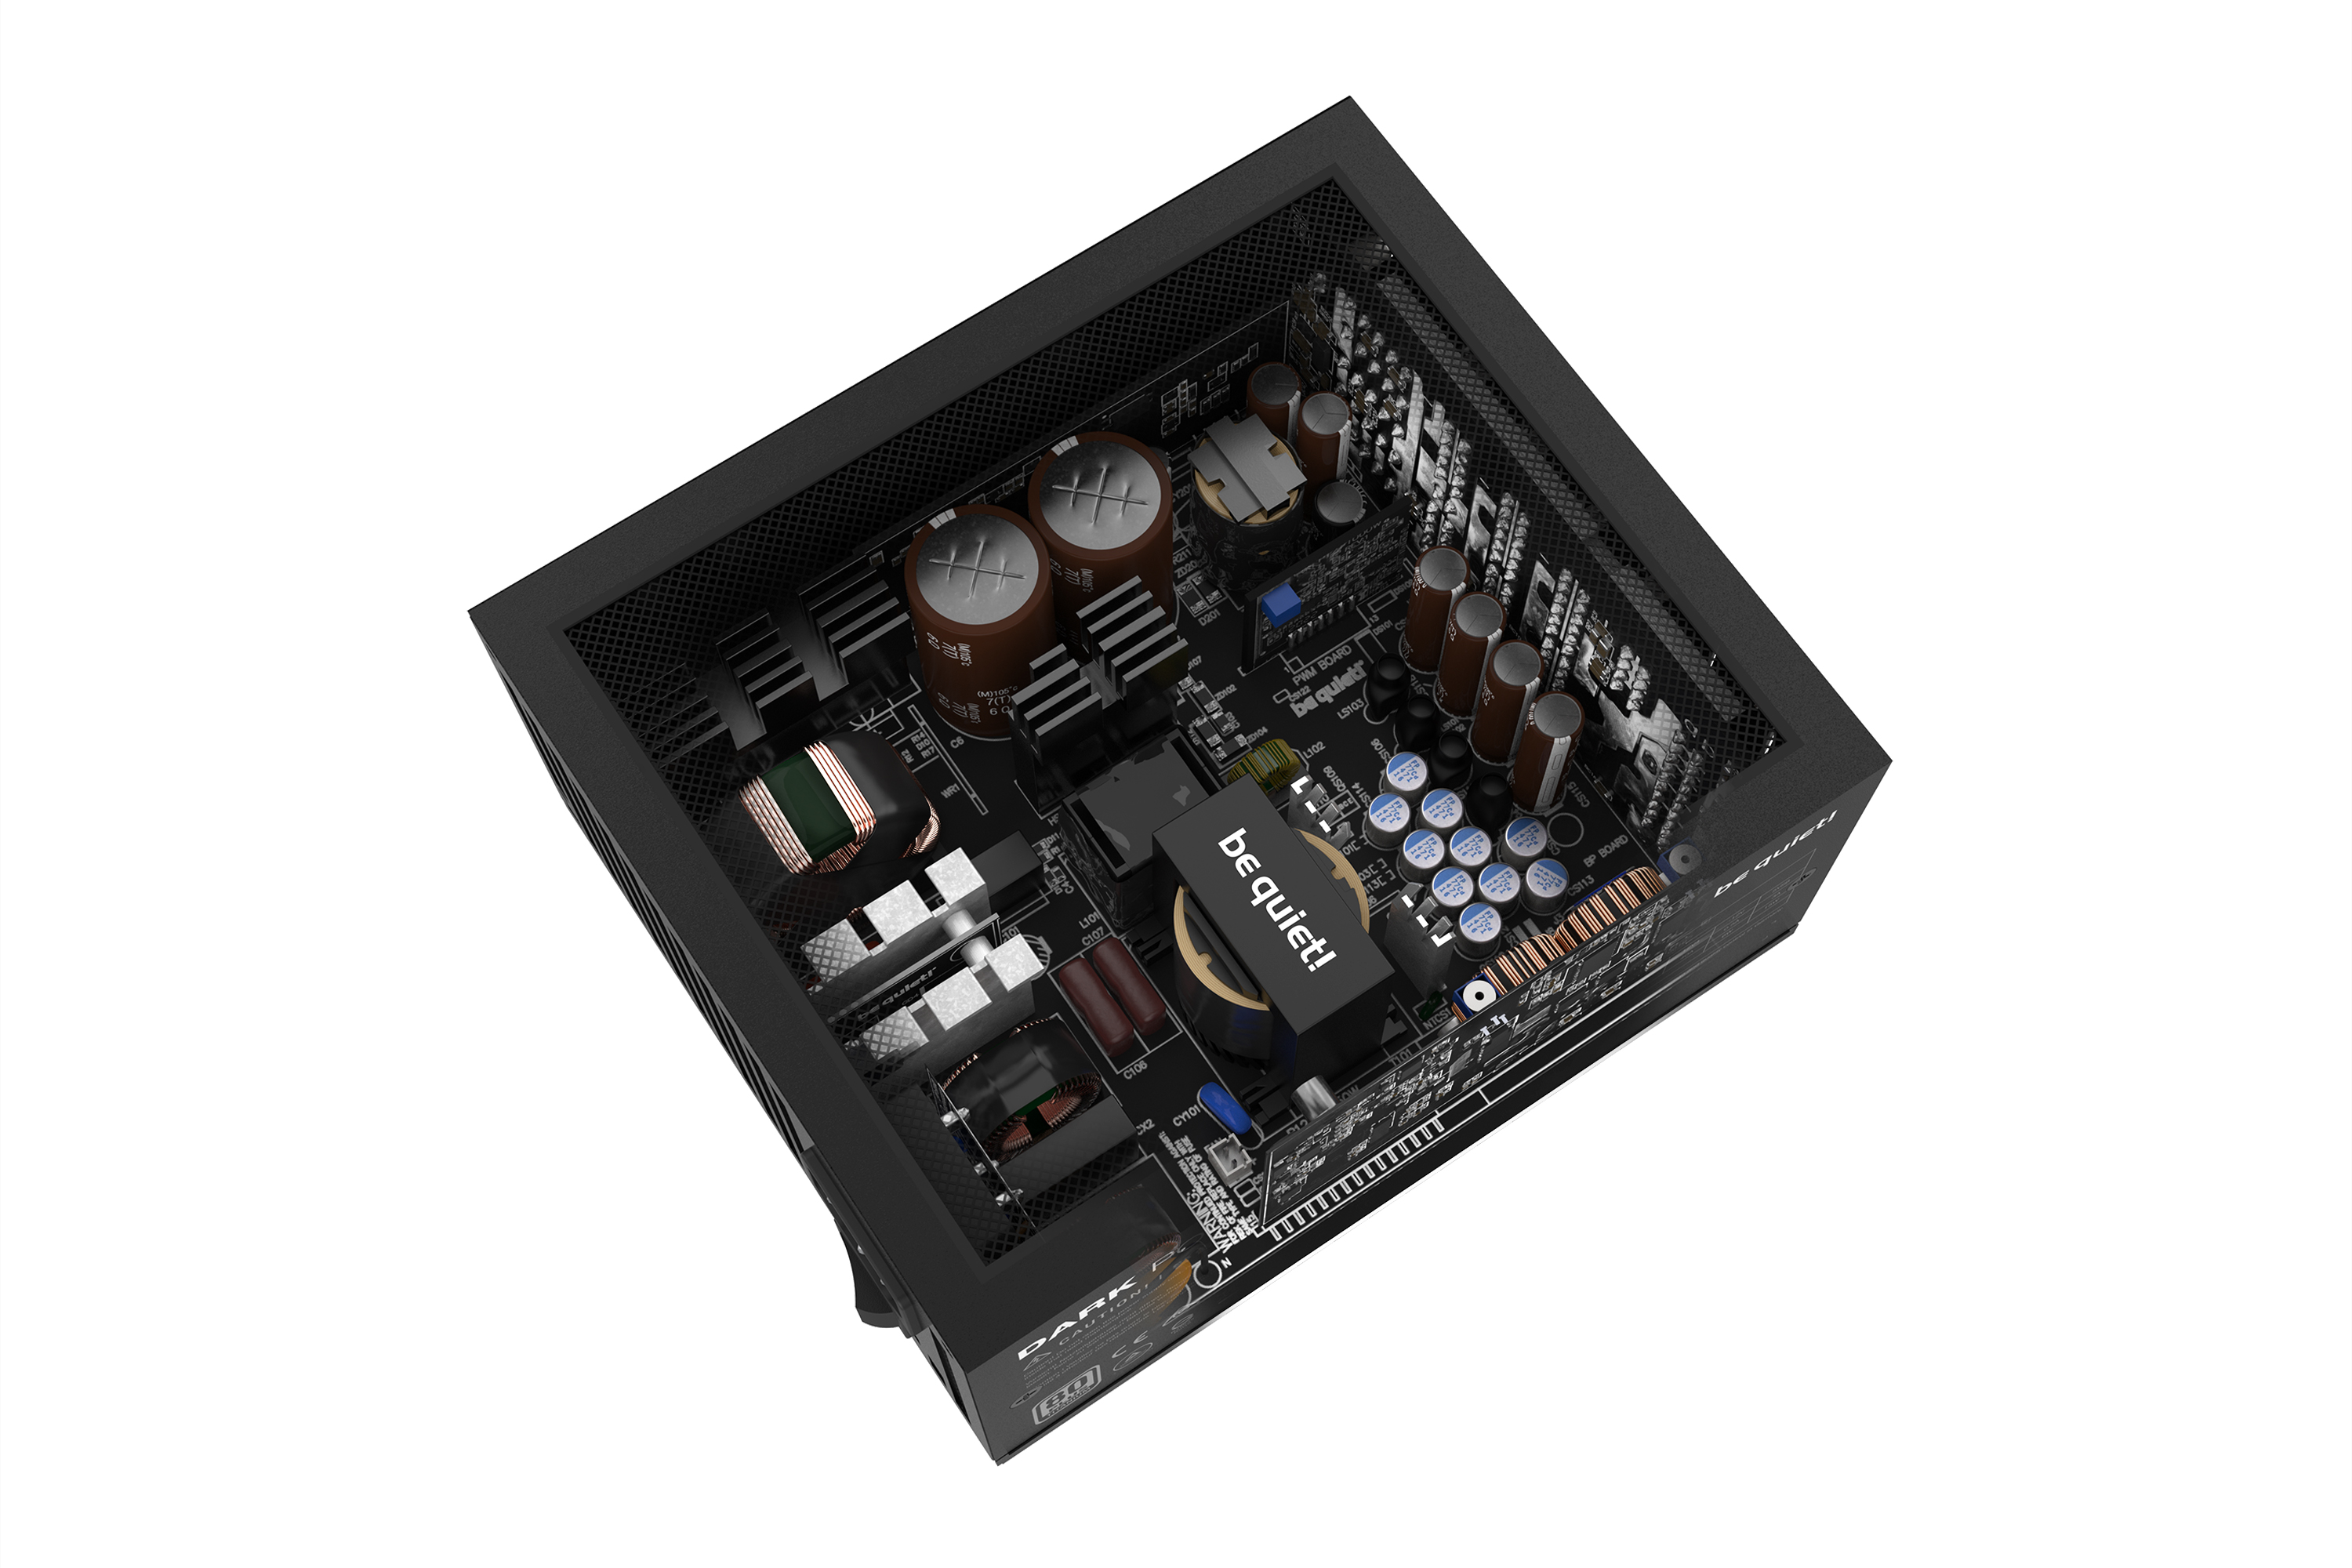 be quiet! Dark Power 13 1000W, ATX3.0, 80+Titanium, 1x 12VHPWR (600W), ErP, Energy Star 8 APFC, Sleeved, 4xPCI-Ex(6+2), 13xSATA, 3xPATA, Full Cable Management, Switchable 4 or 1 Rail, Silent Wings 135